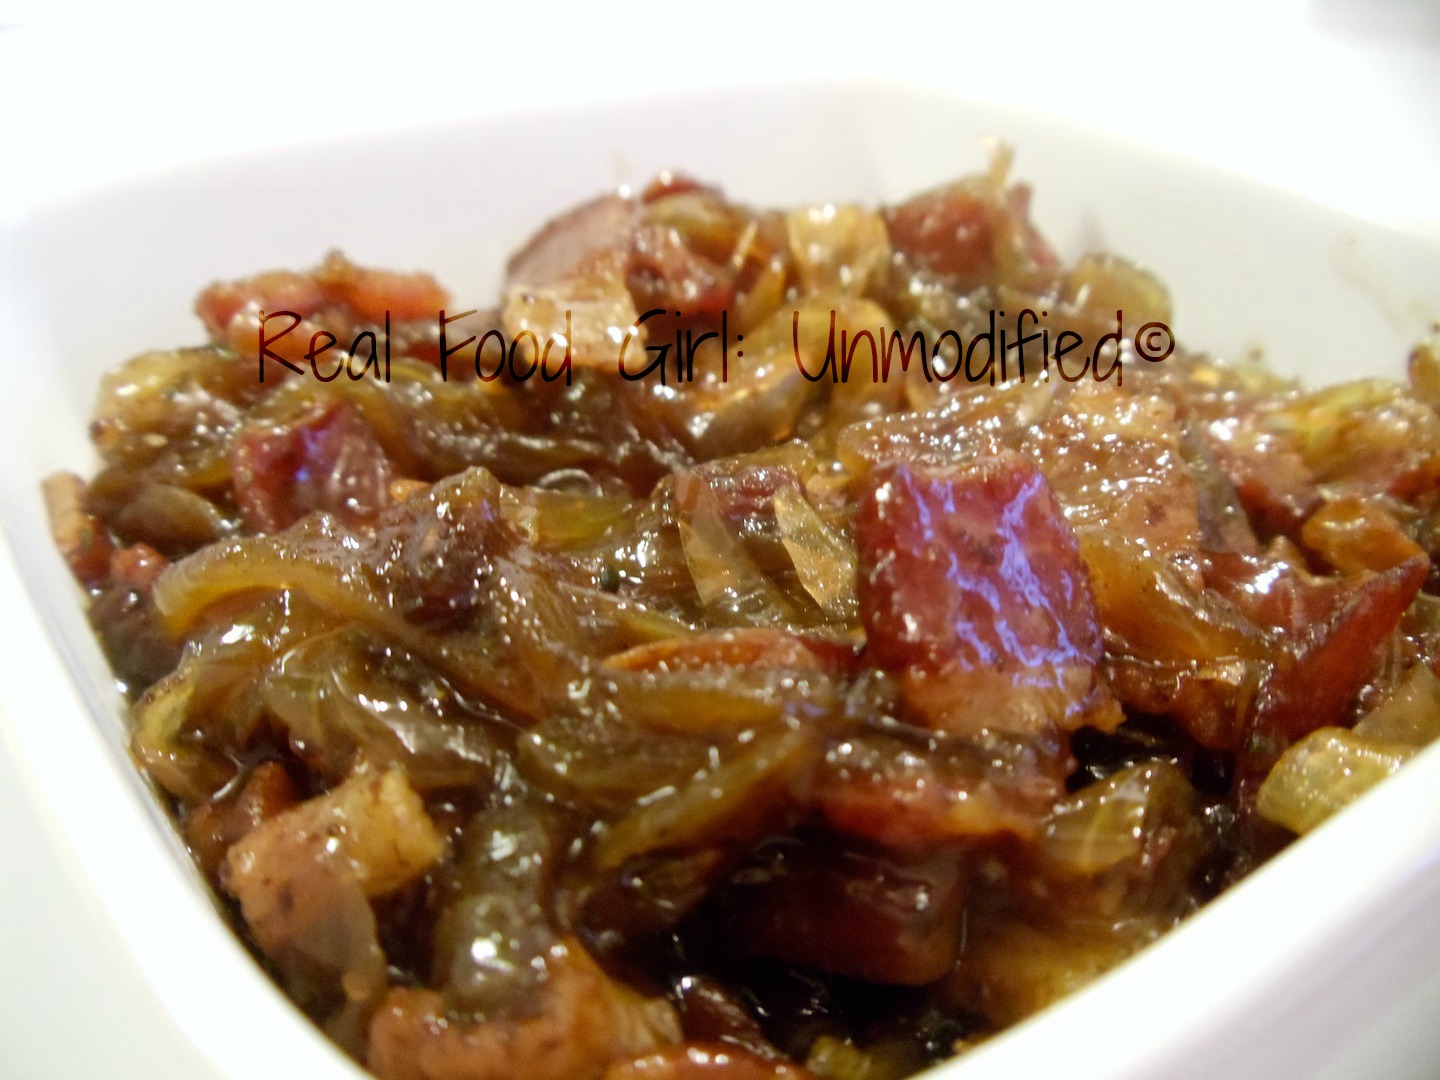 GMO-Free/Organic Onion-Bacon "Jam". You'll eat most of it from the pan before it's done! |Real Food Girl: Unmodified